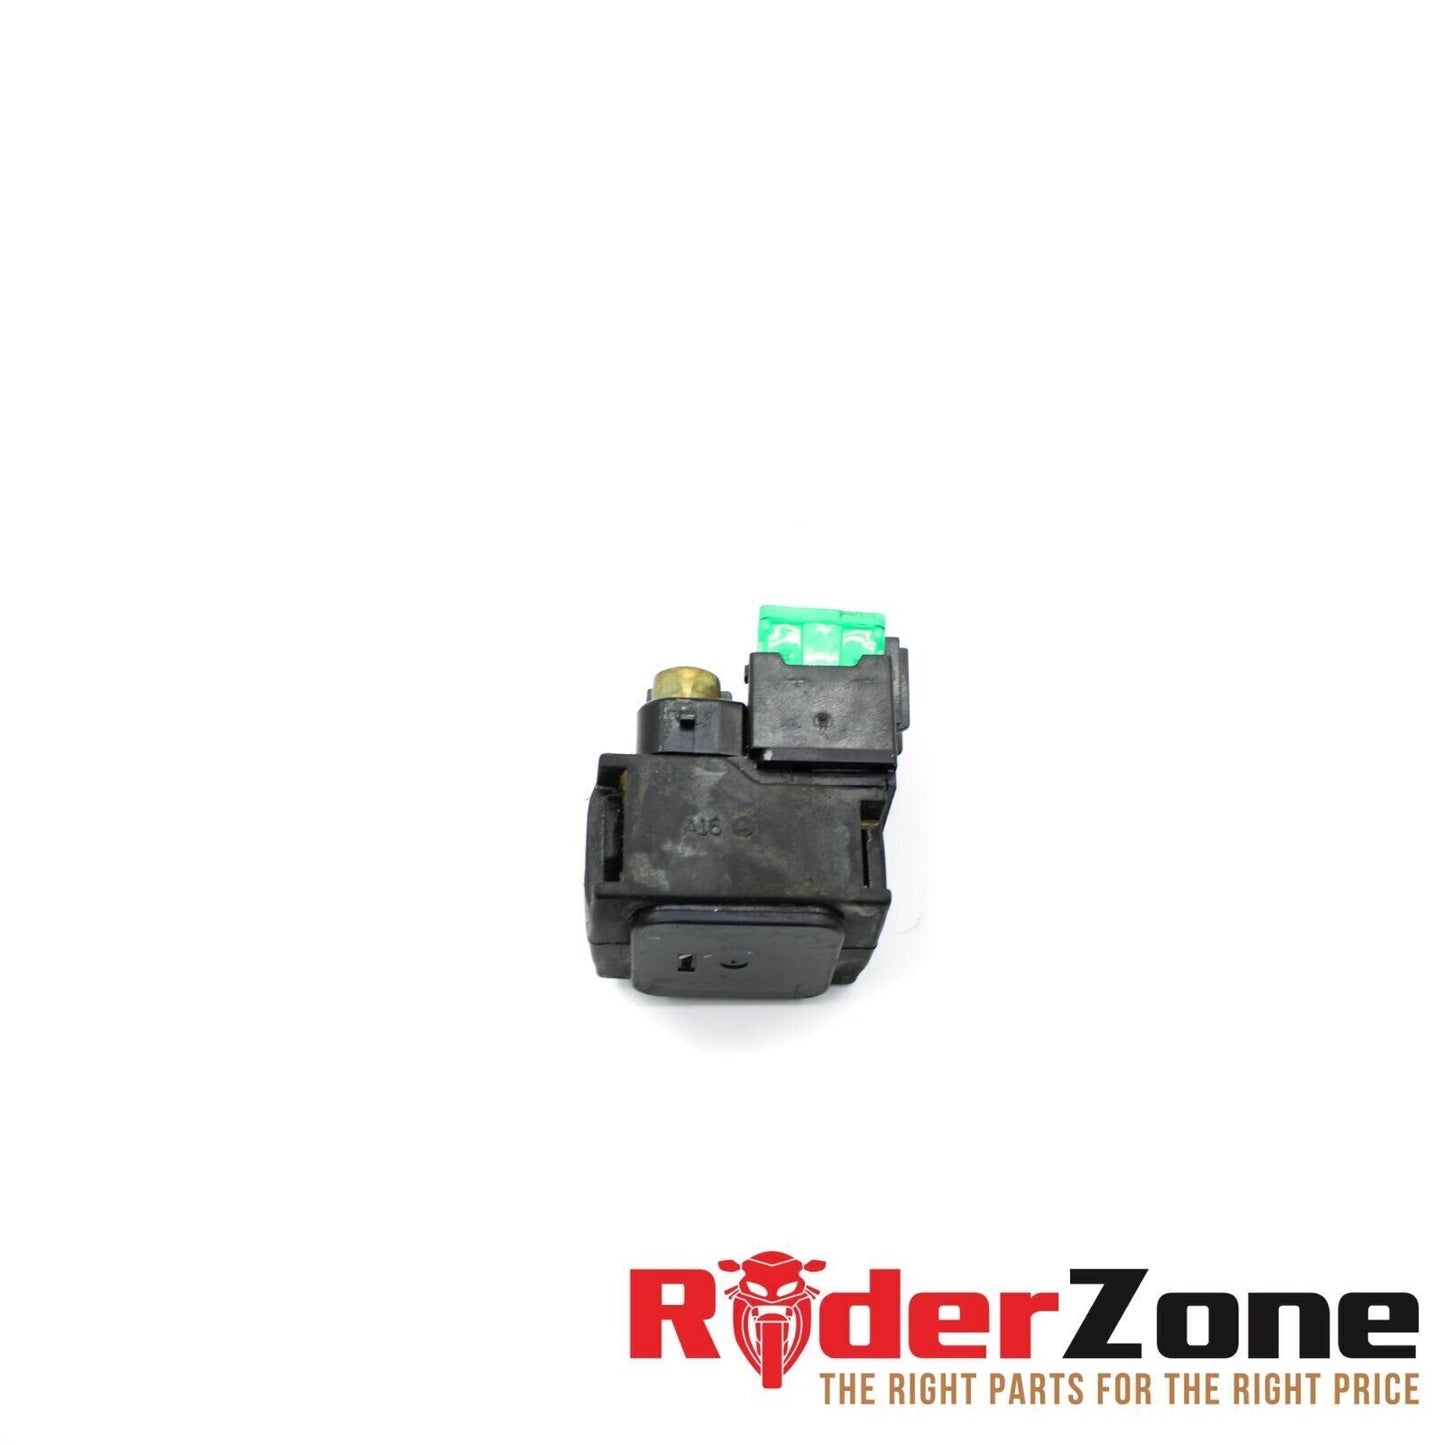 2017 - 2019 DUCATI MONSTER 1200 R S BATTERY RELAY FUSE BOX PROTECTOR STOCK OEM